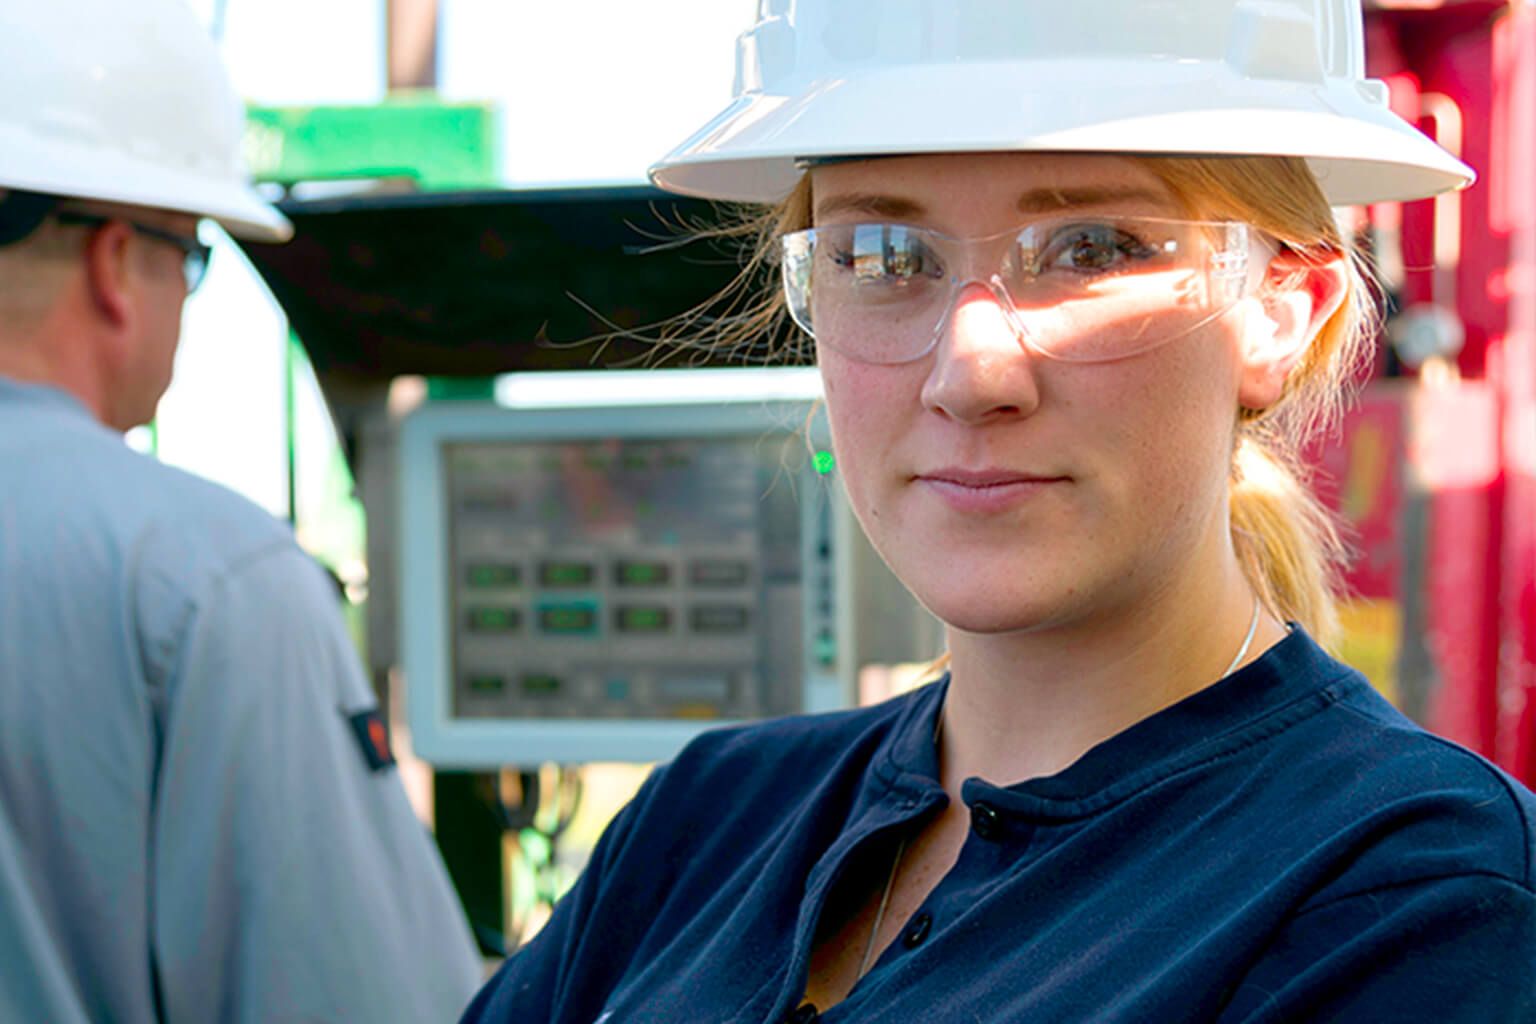 Person wearing hard hat and safety glasses